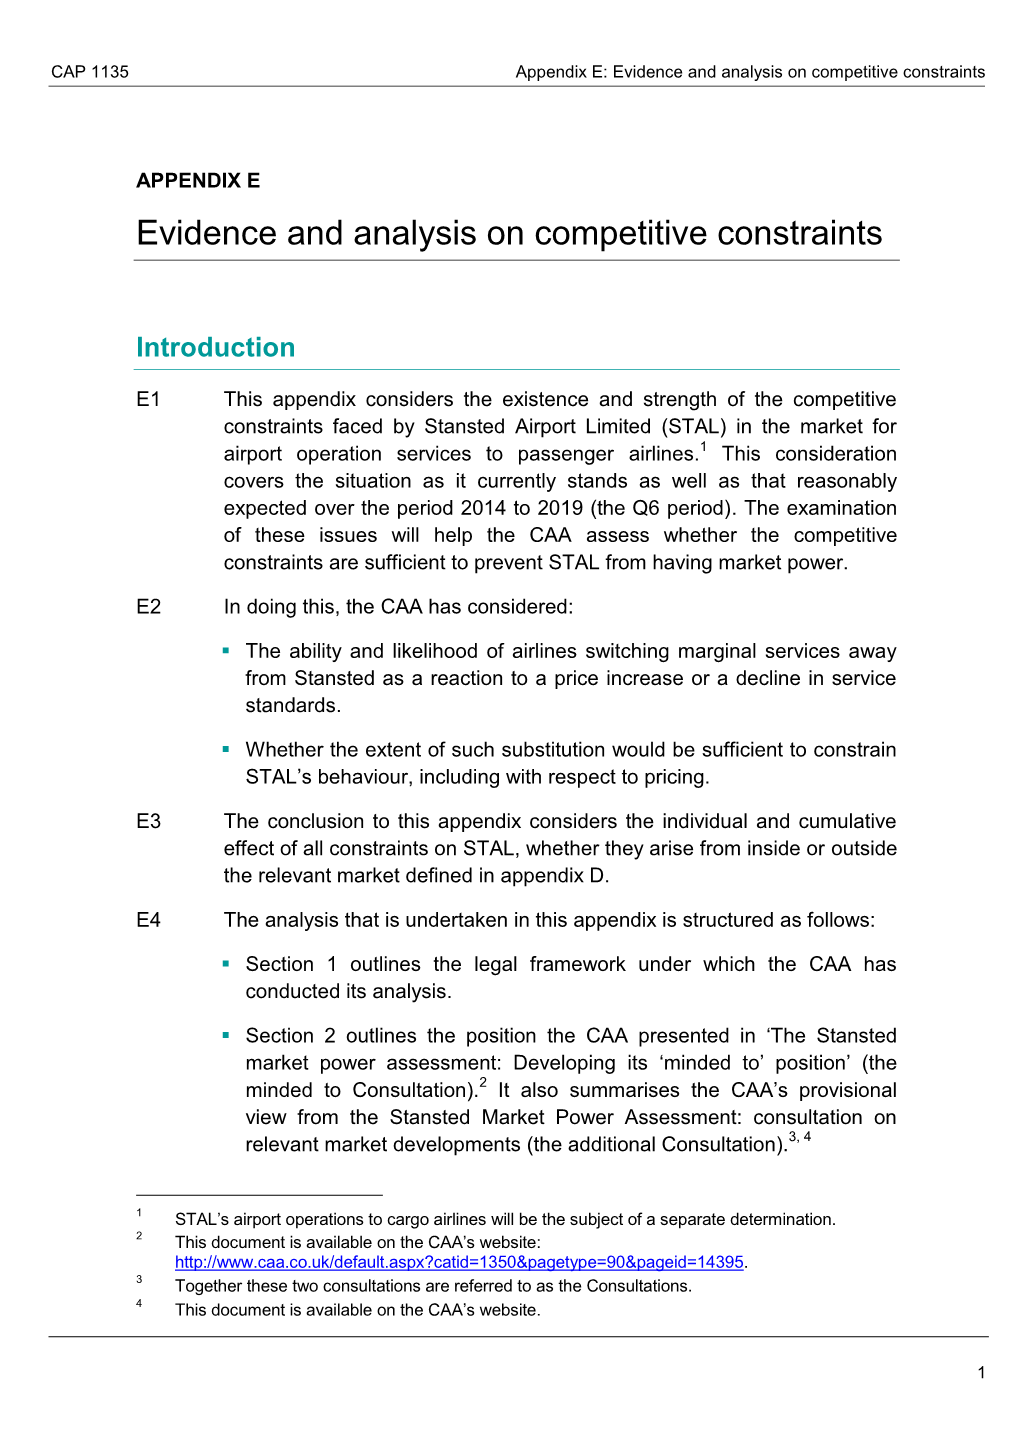 Appendix E: Evidence and Analysis on Competitive Constraints